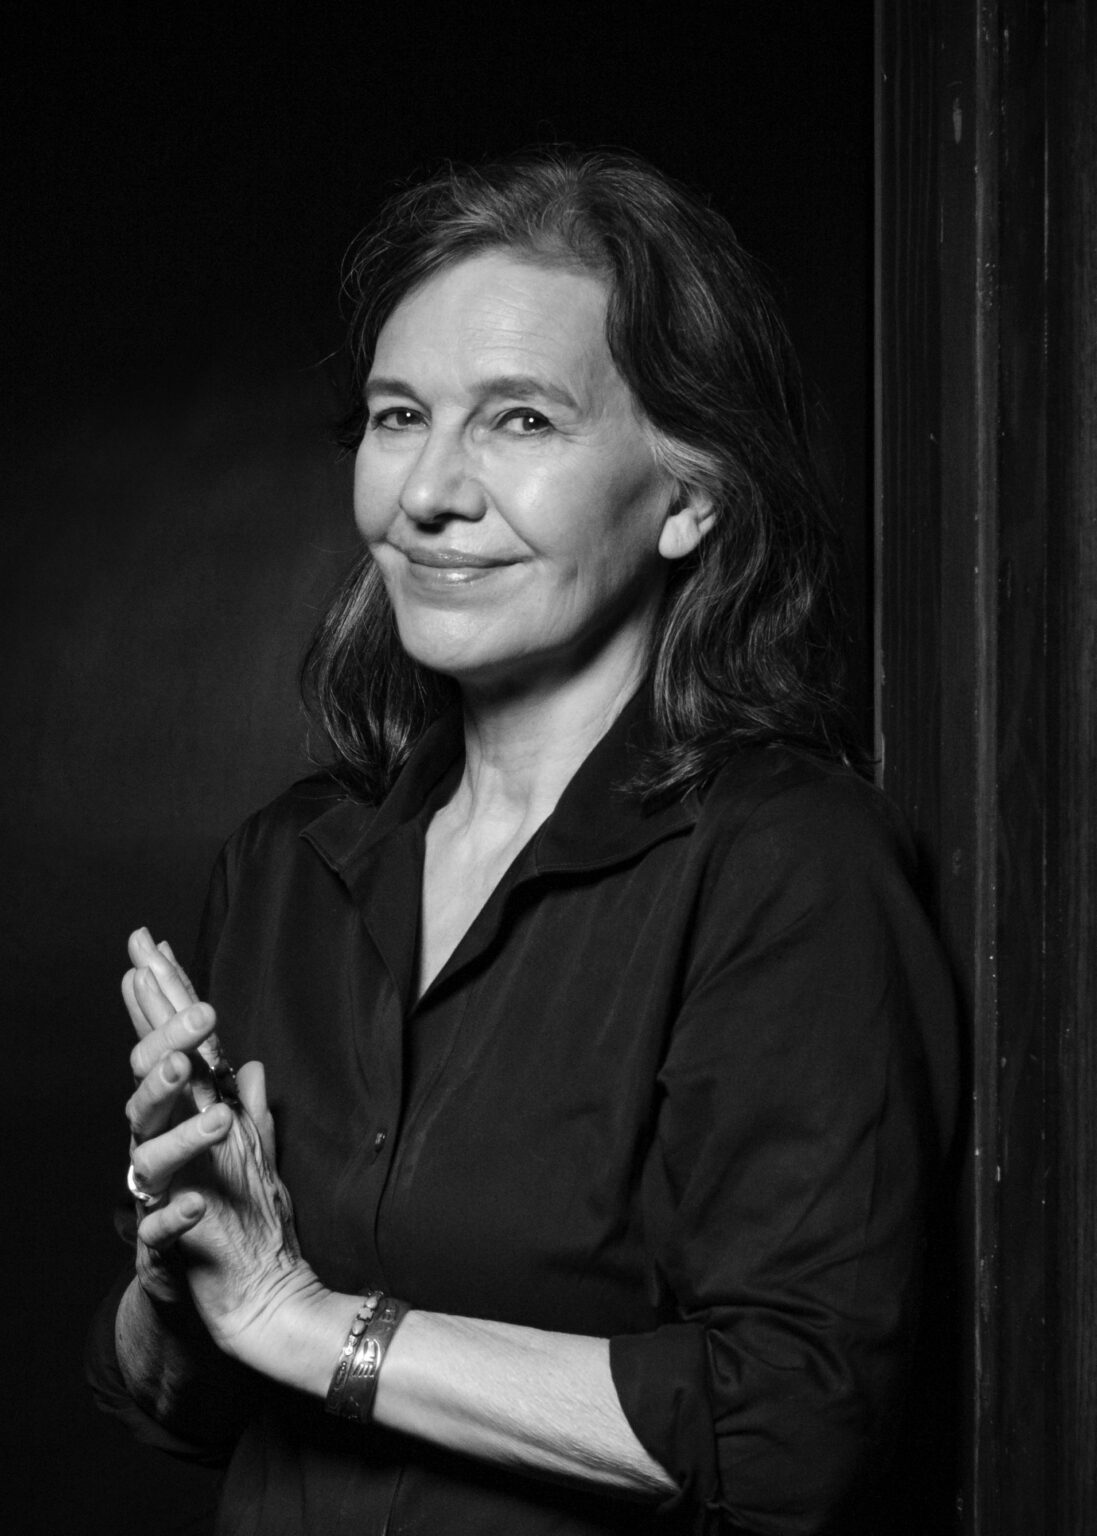 Hilary Abe/ Library of CongressLouise Erdrich is one of the most acclaimed American authors of the 20th century.